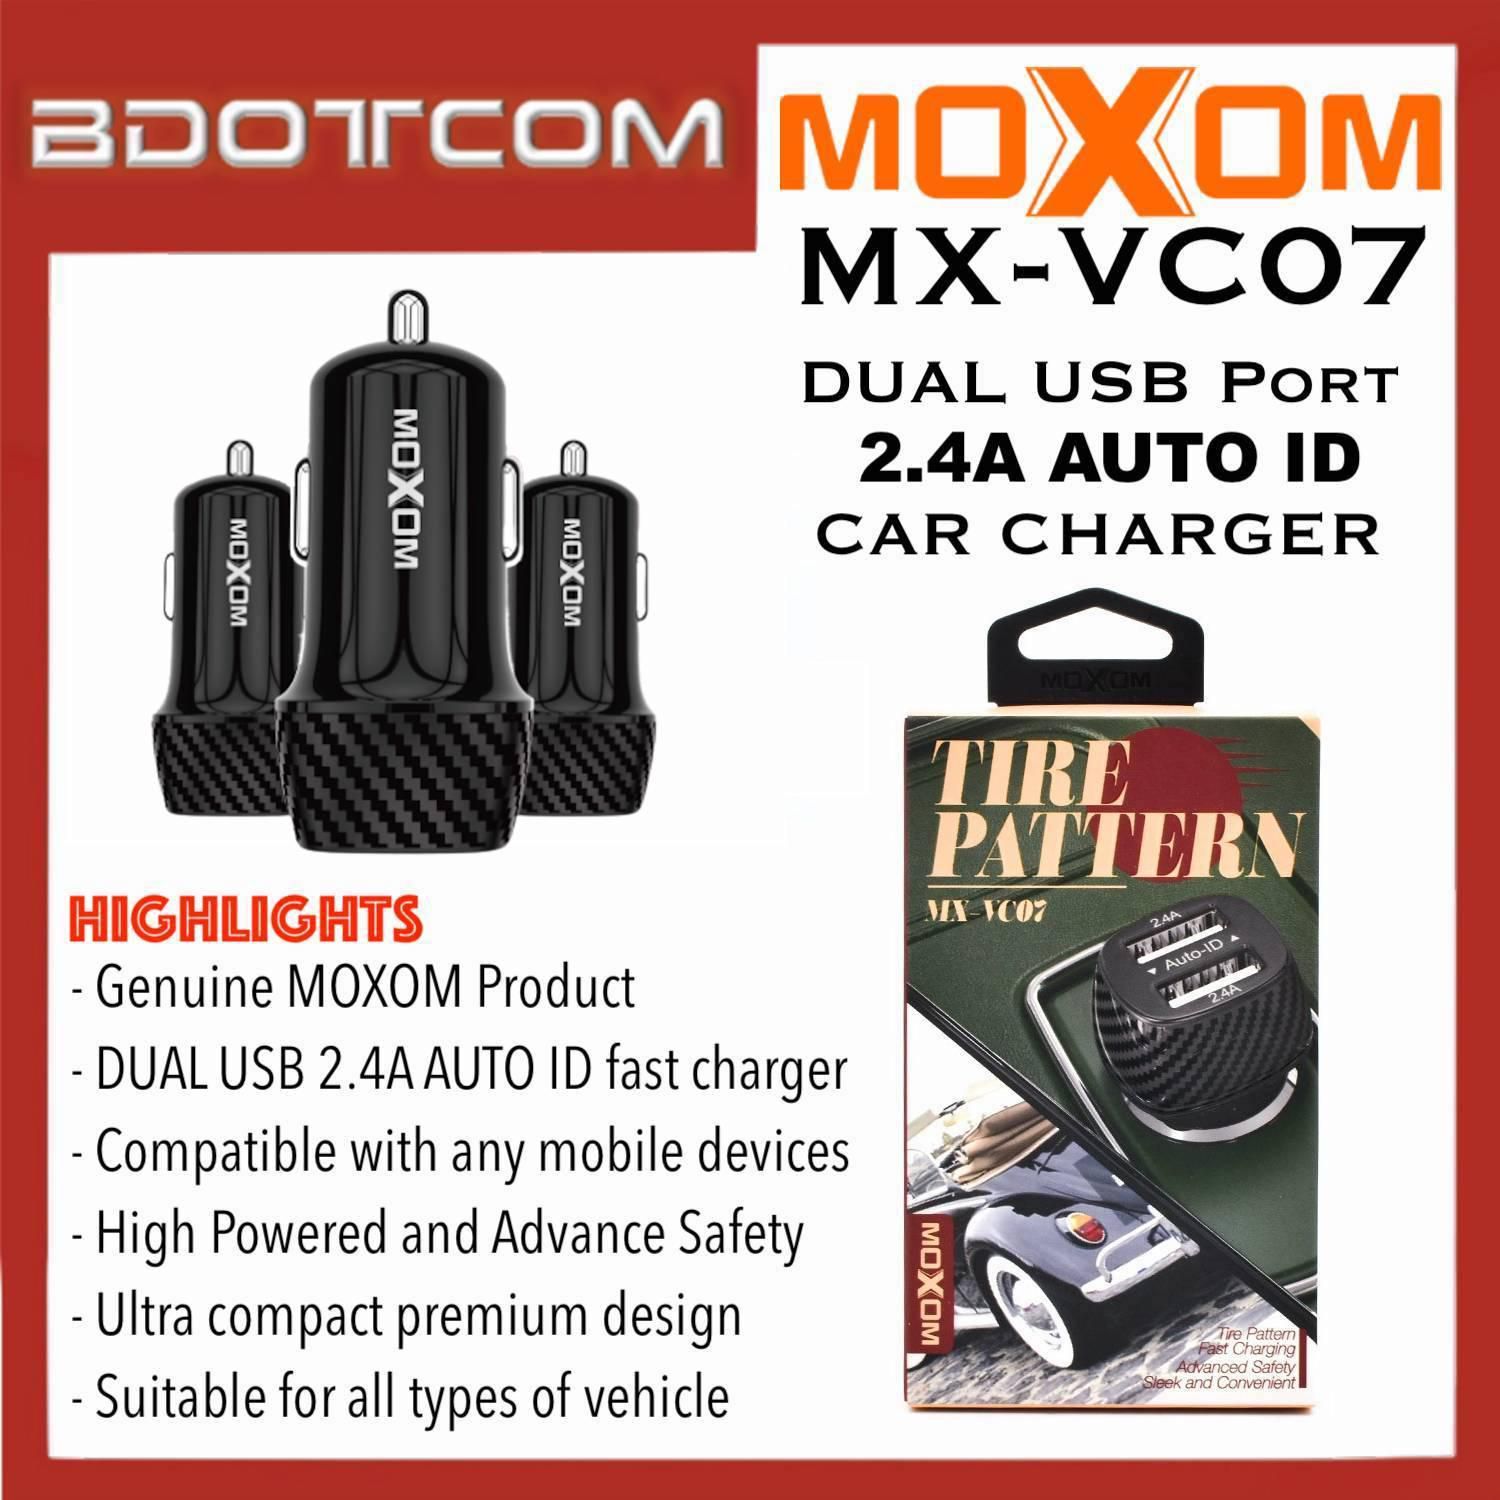 MOXOM MX-VC07 Tire Pattern Dual USB Fast Charging 2.4A AUTO ID Car Charger